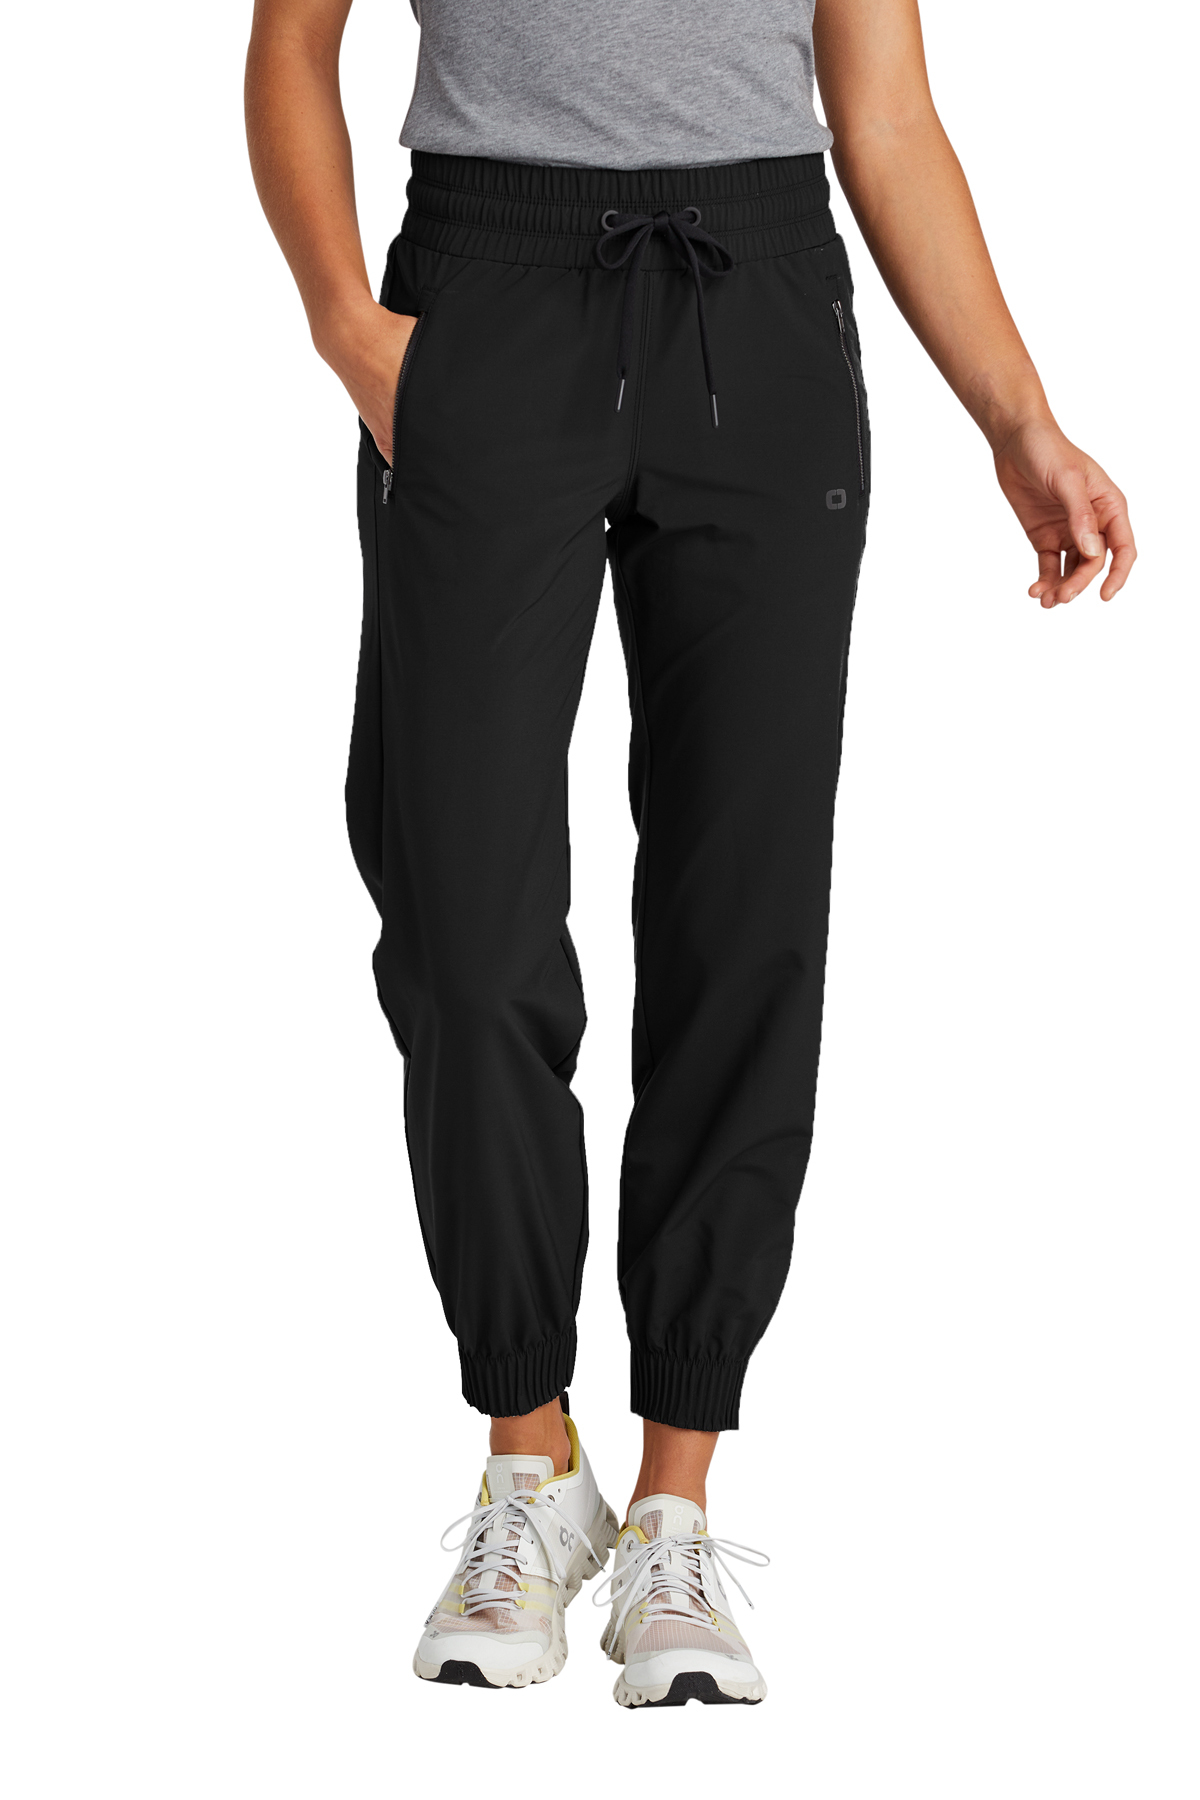 OGIO Ladies Connection Jogger, Product